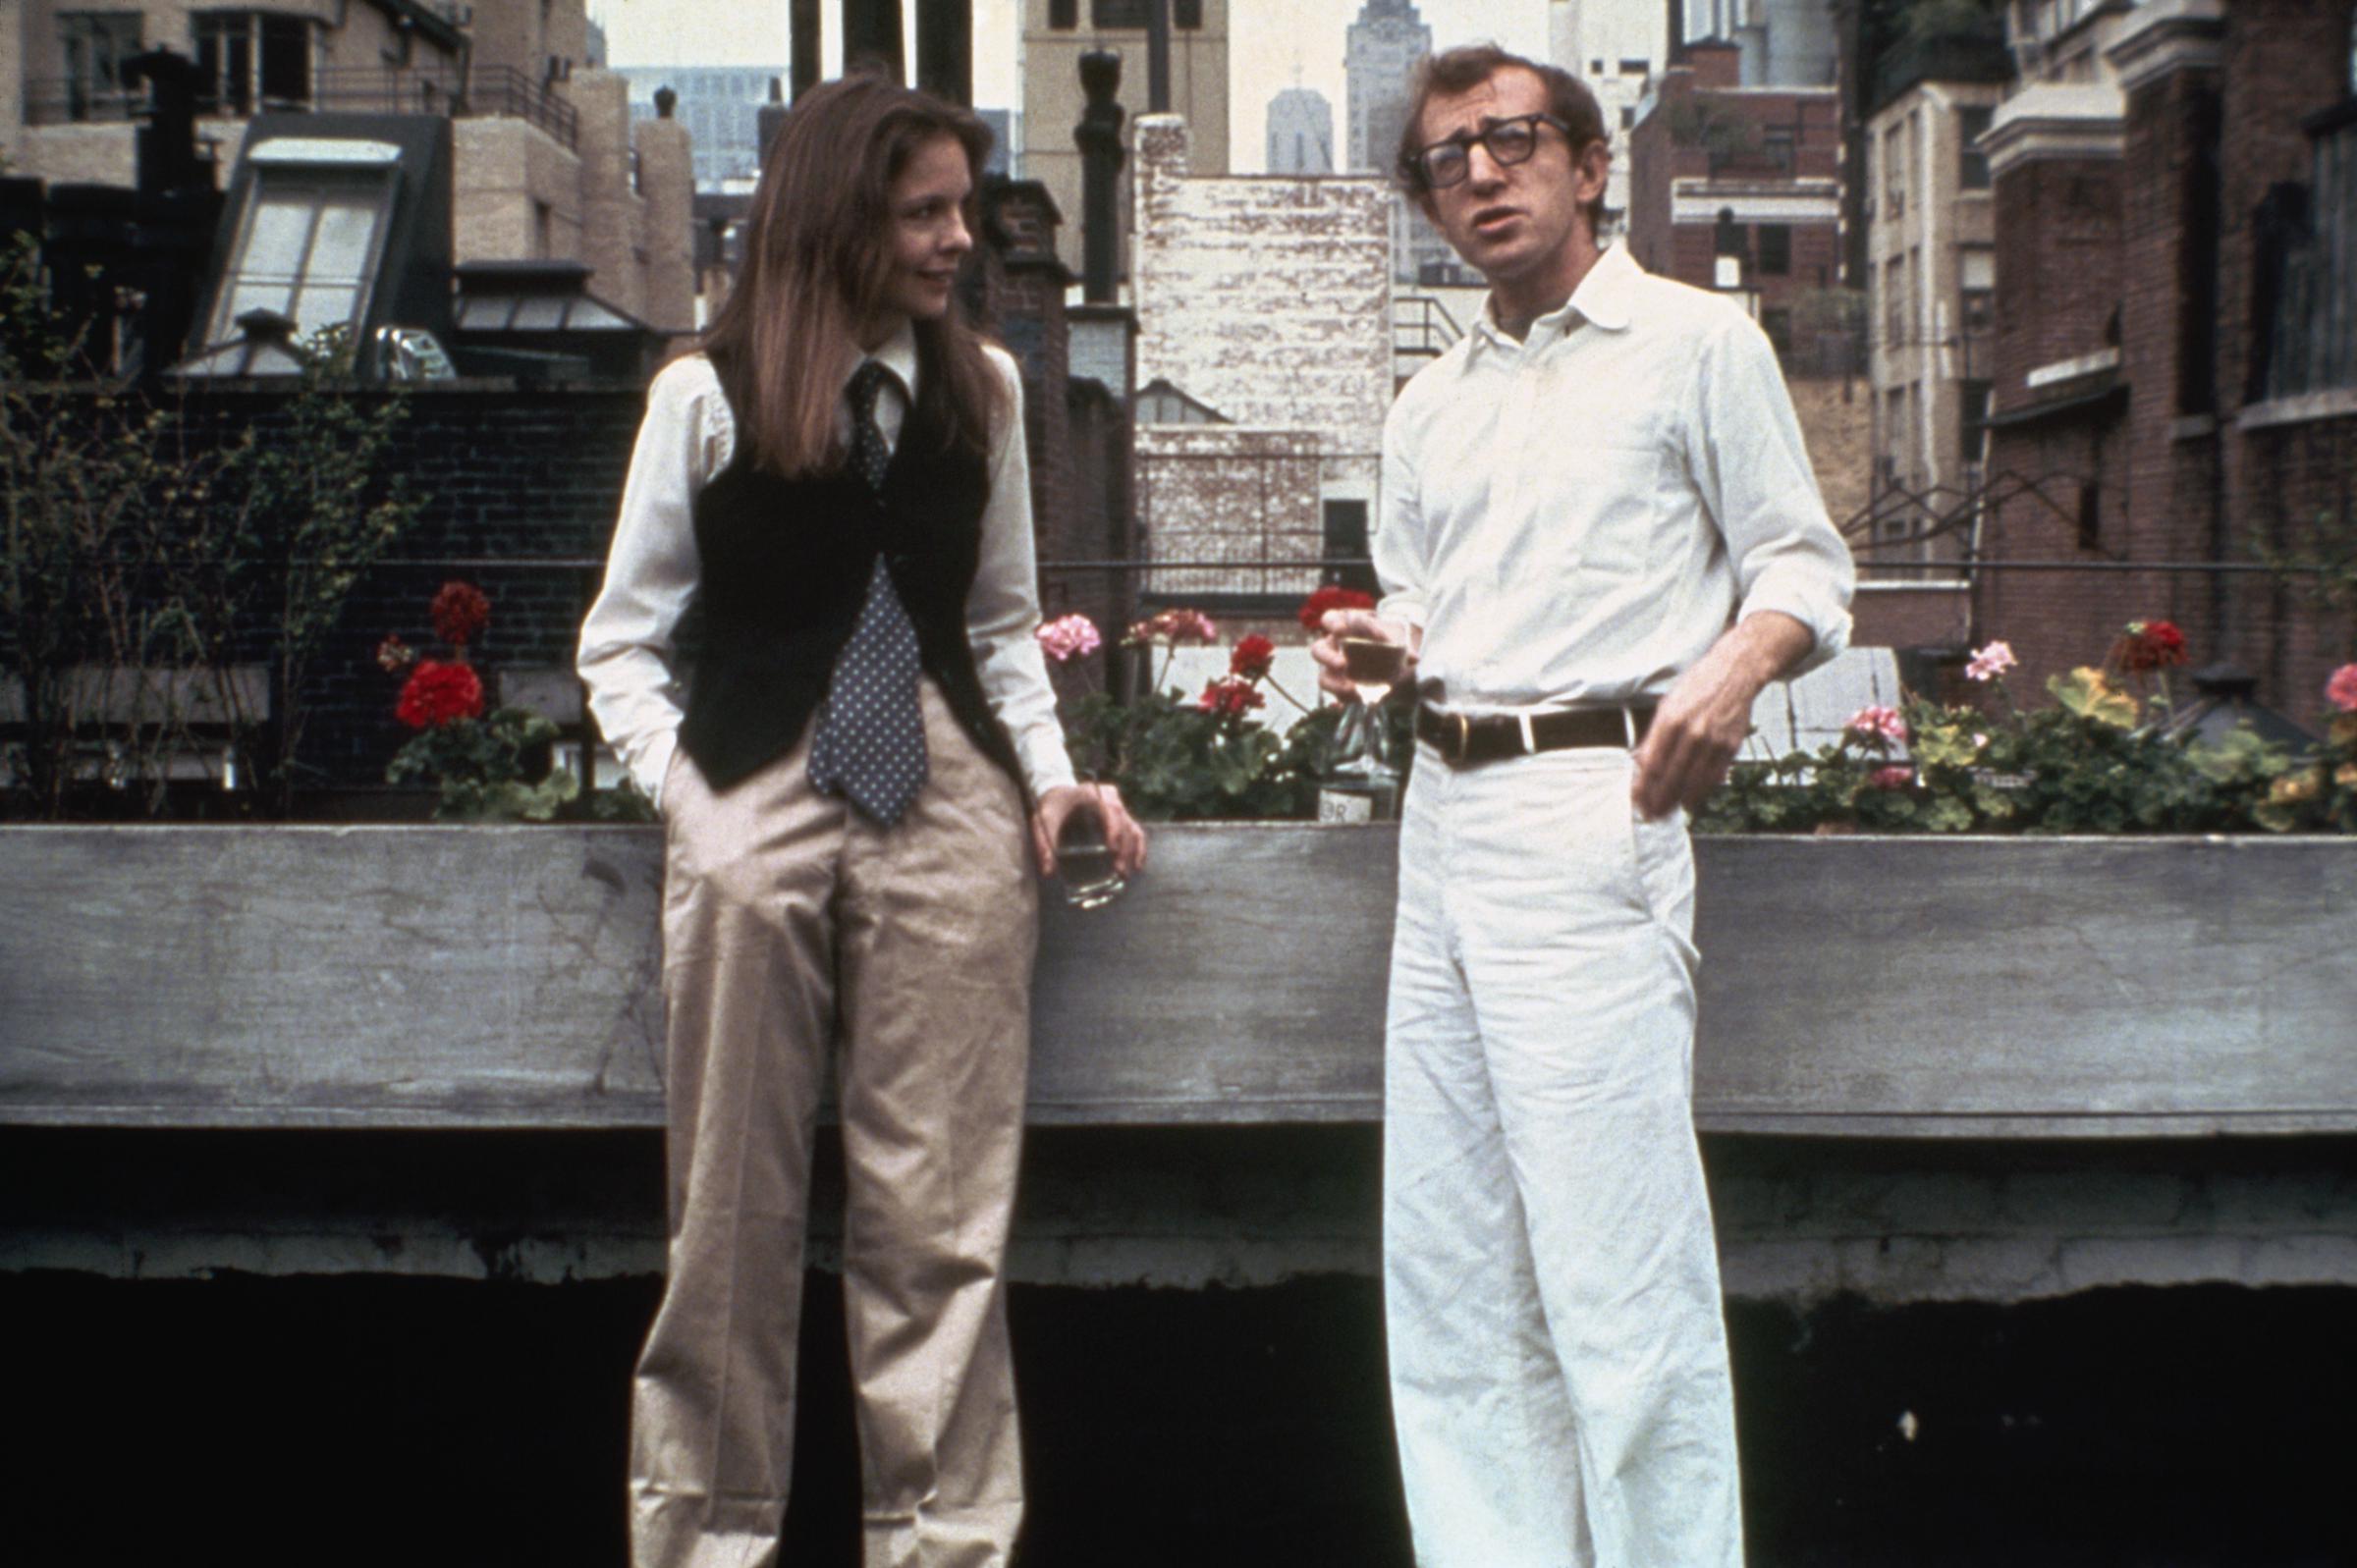 Diane Keaton and Woody Allen in the film "Annie Hall" in 1977 | Source: Getty Images